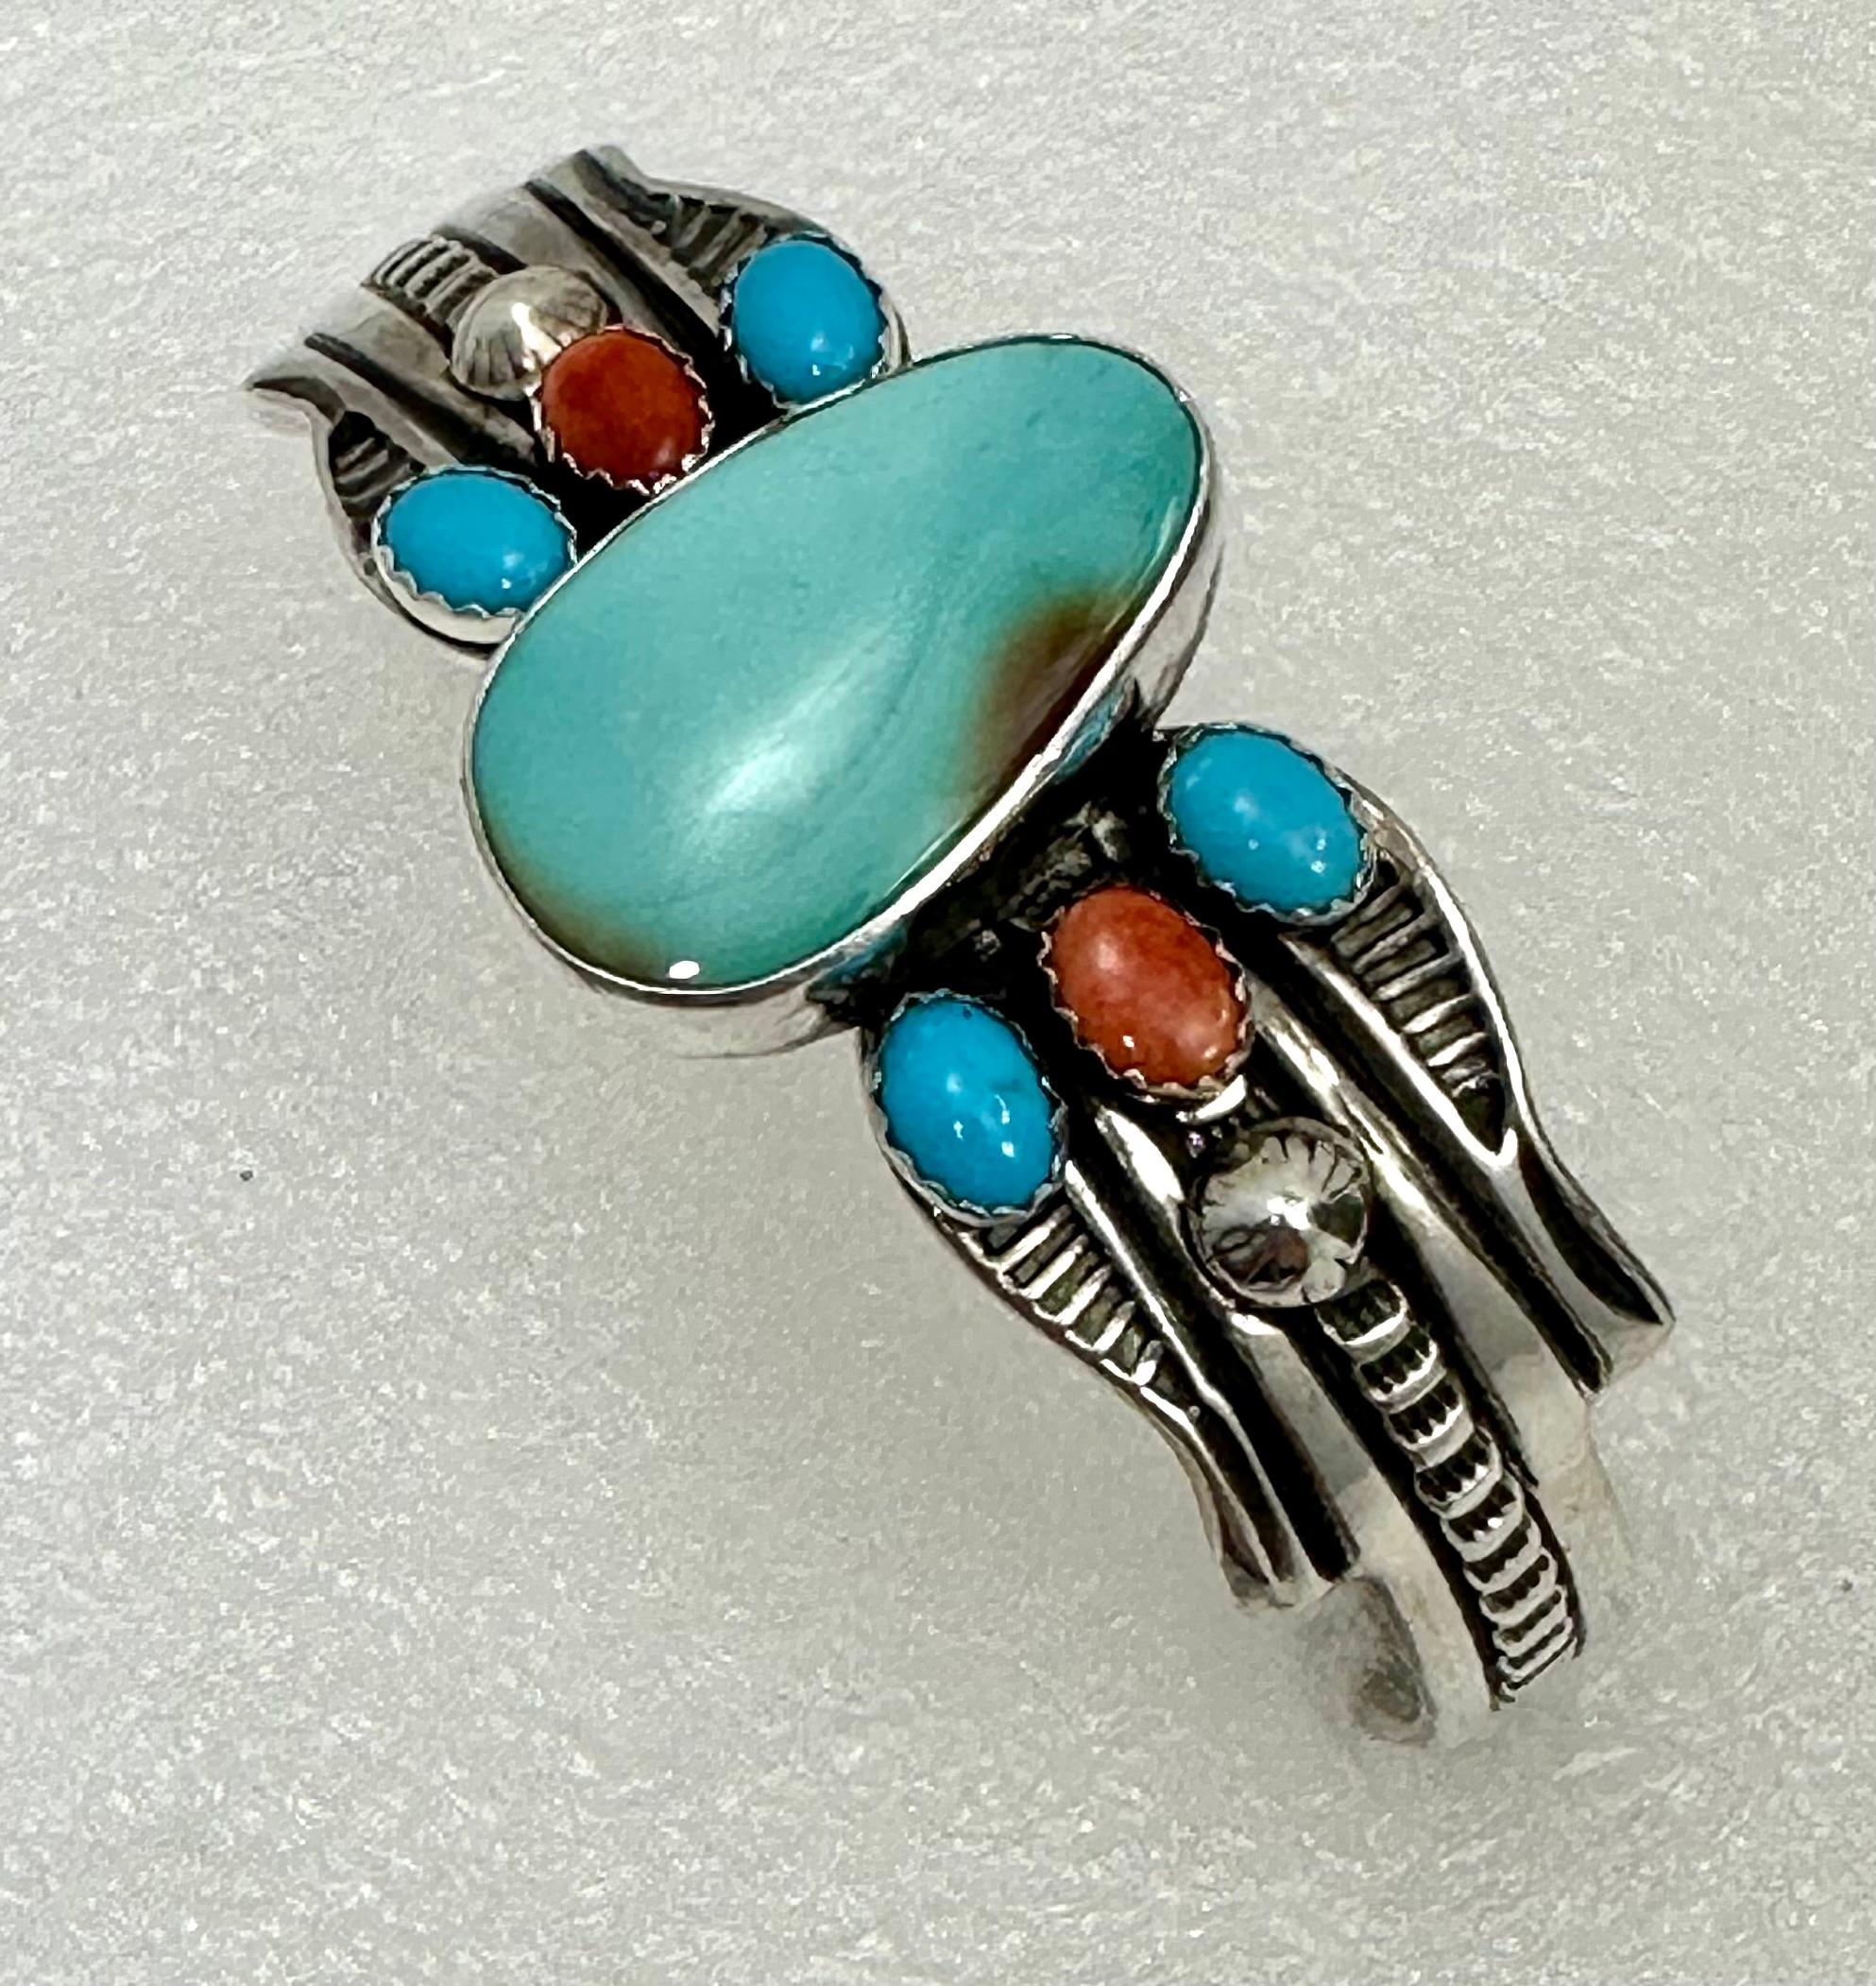 Sterling Silver .925 Turquoise & Coral Bracelet 
Signed by Navajo Artist Daniel Miko
2 1/2